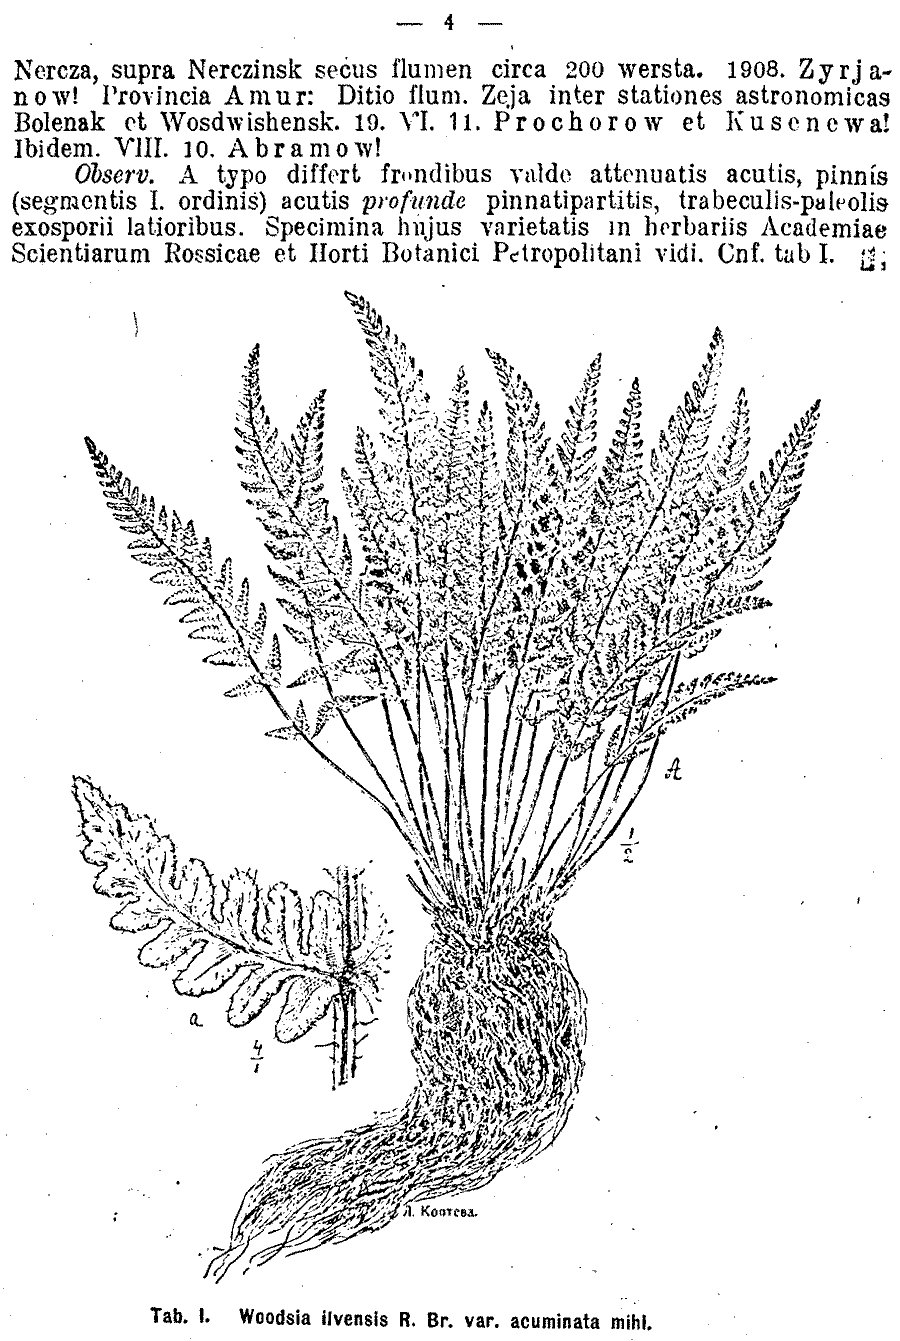 Woodsia_ilvensis_acuminata_2a.png